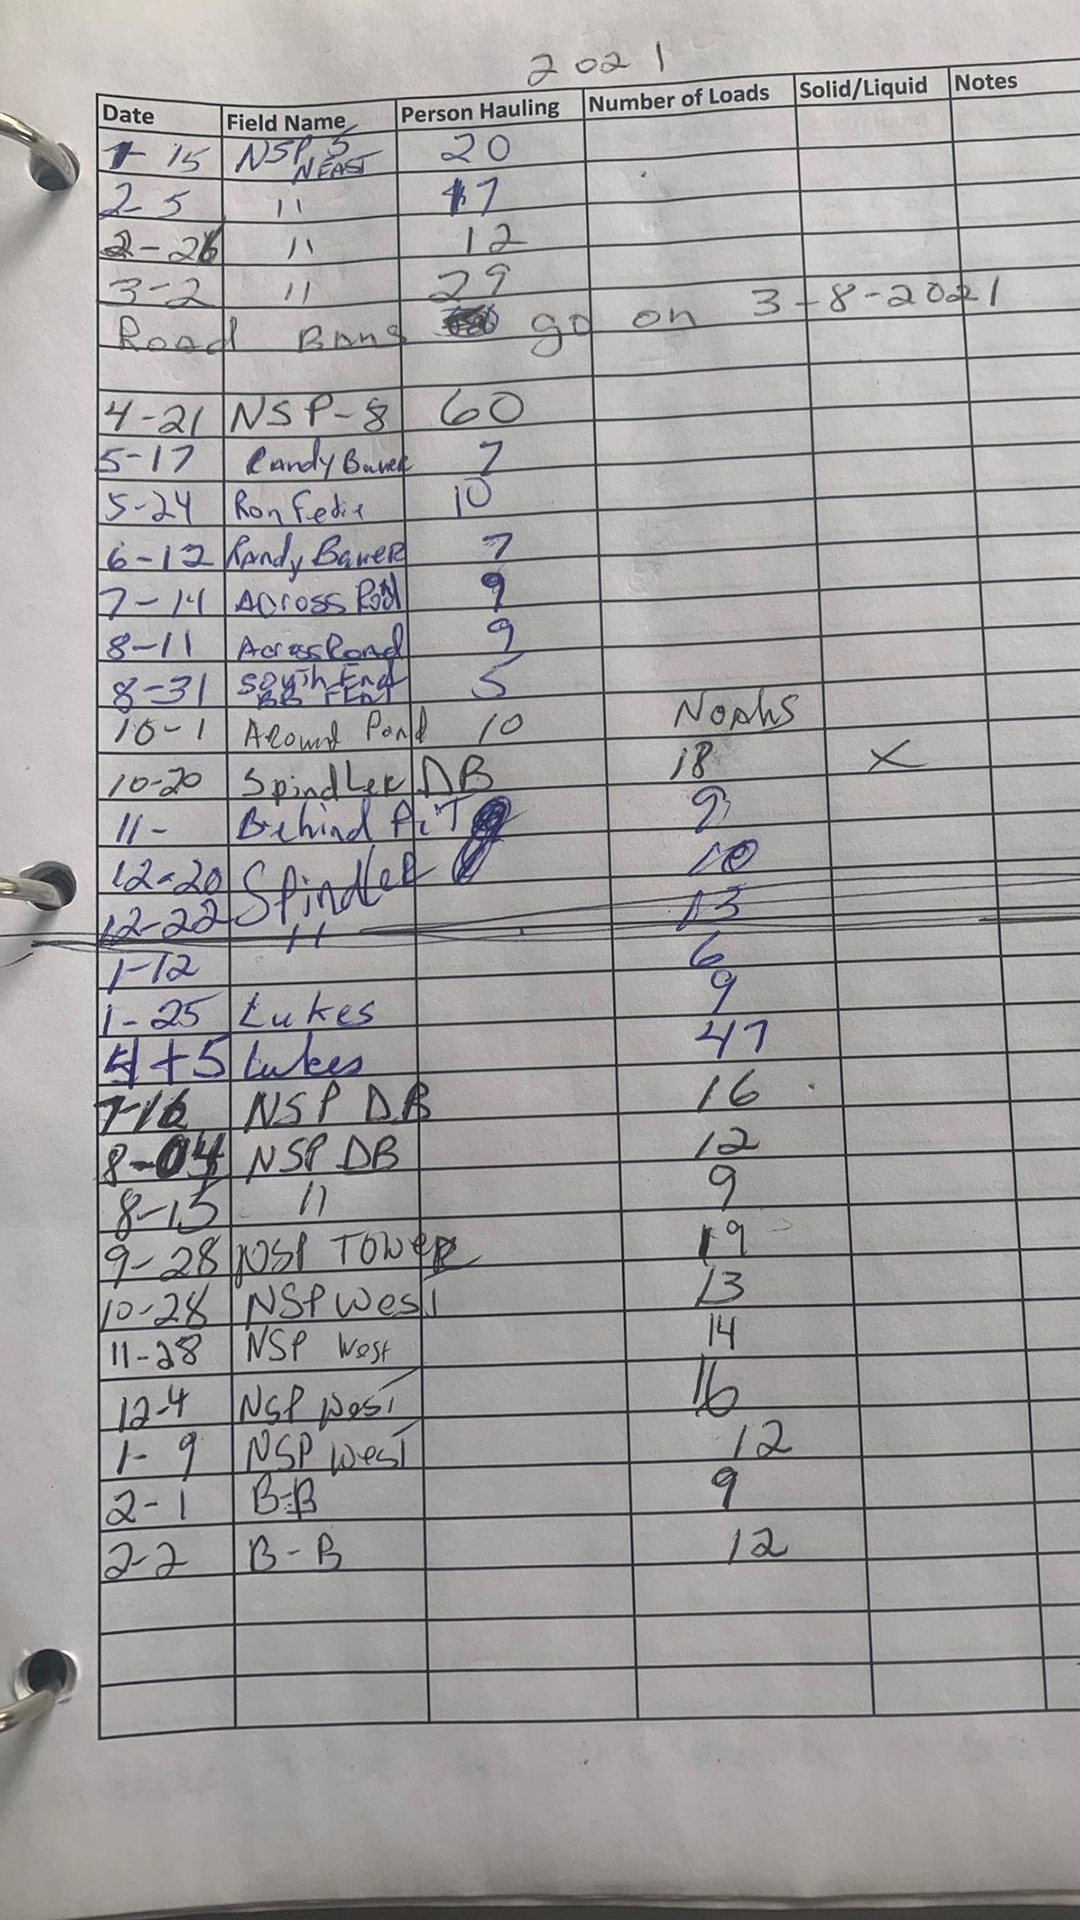 A paper spreadsheet with columns labeled "Date," "Field Name," "Person Hauling," "Number of Loads," "Solid/Liquid" and "Notes" in a 3-ring binder shows hand-written entries on nearly every row.